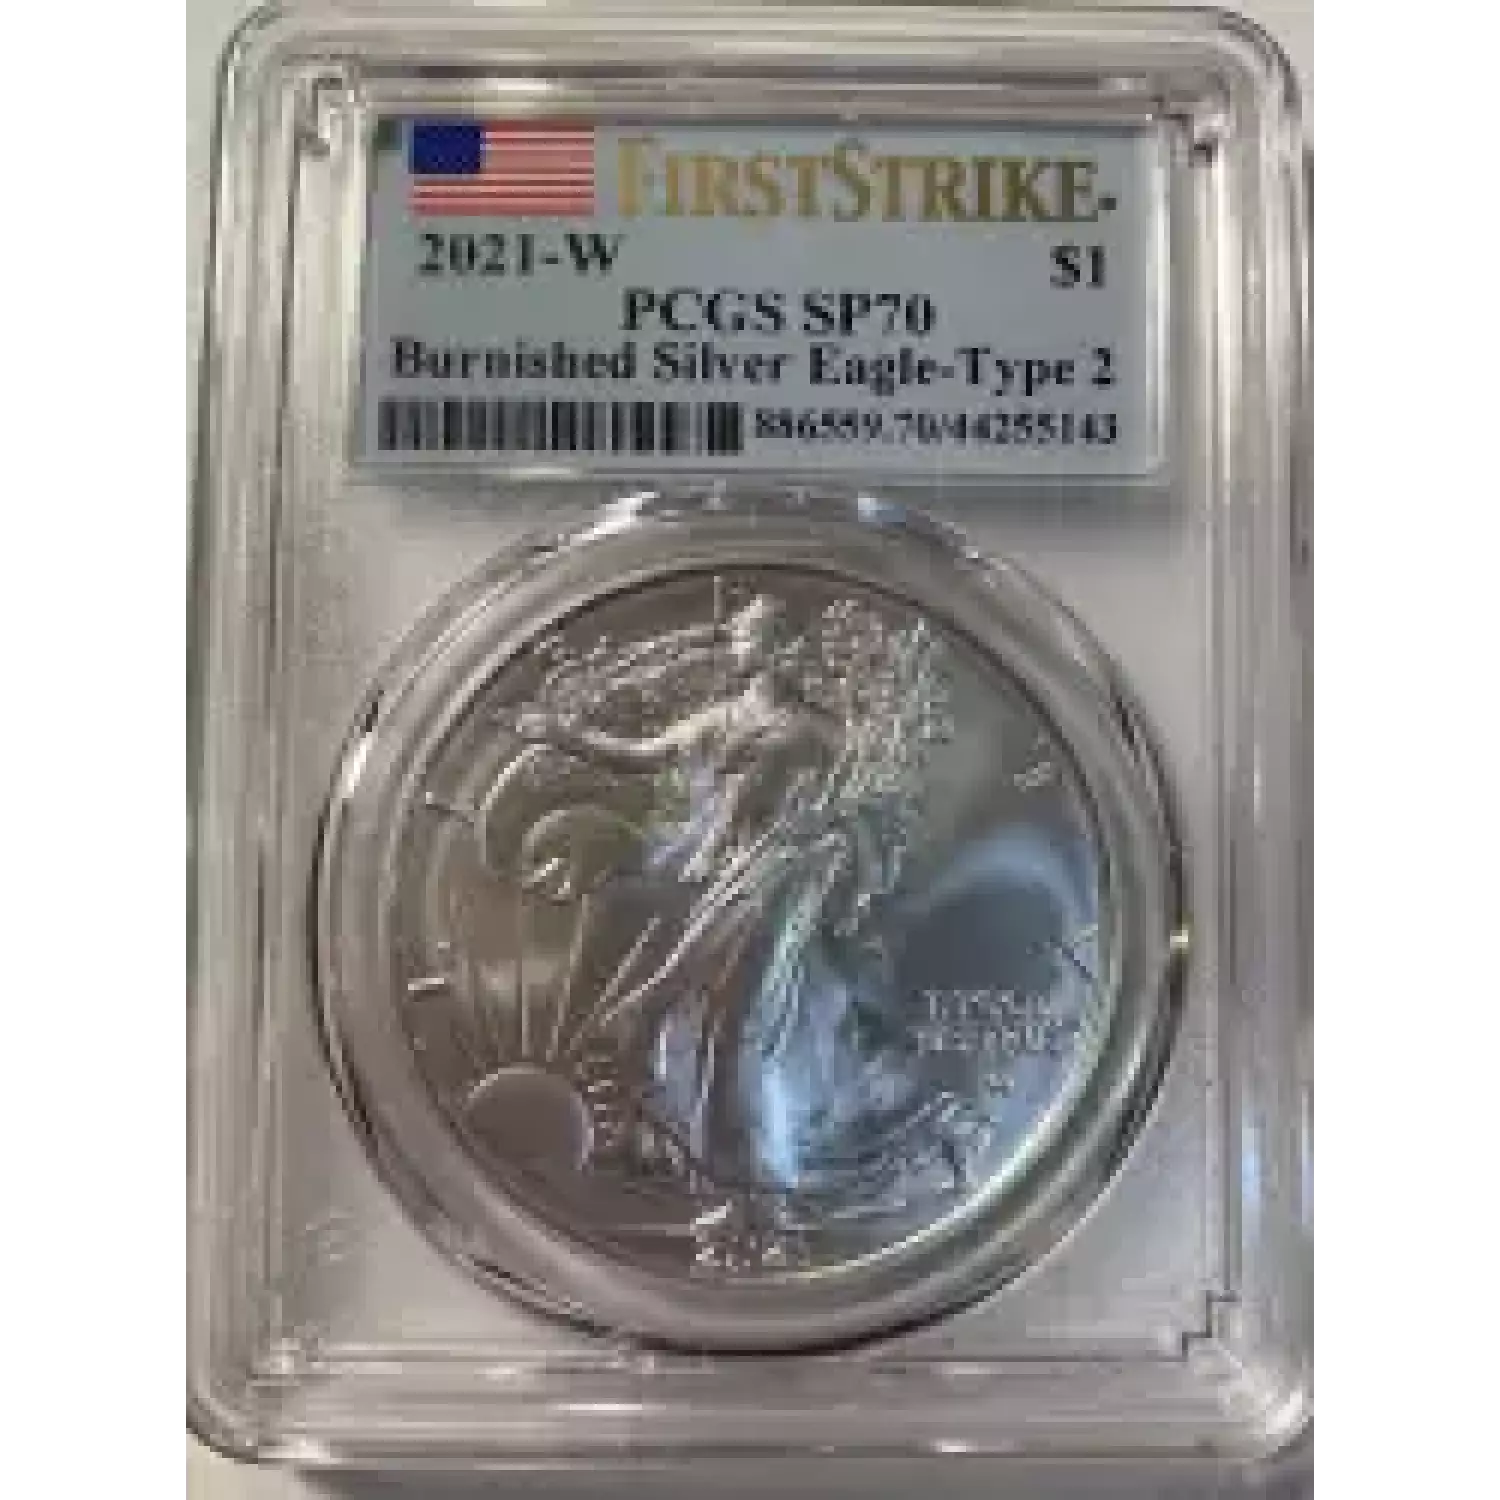 2021-W $1 Burnished Silver Eagle-Type 2 First Strike